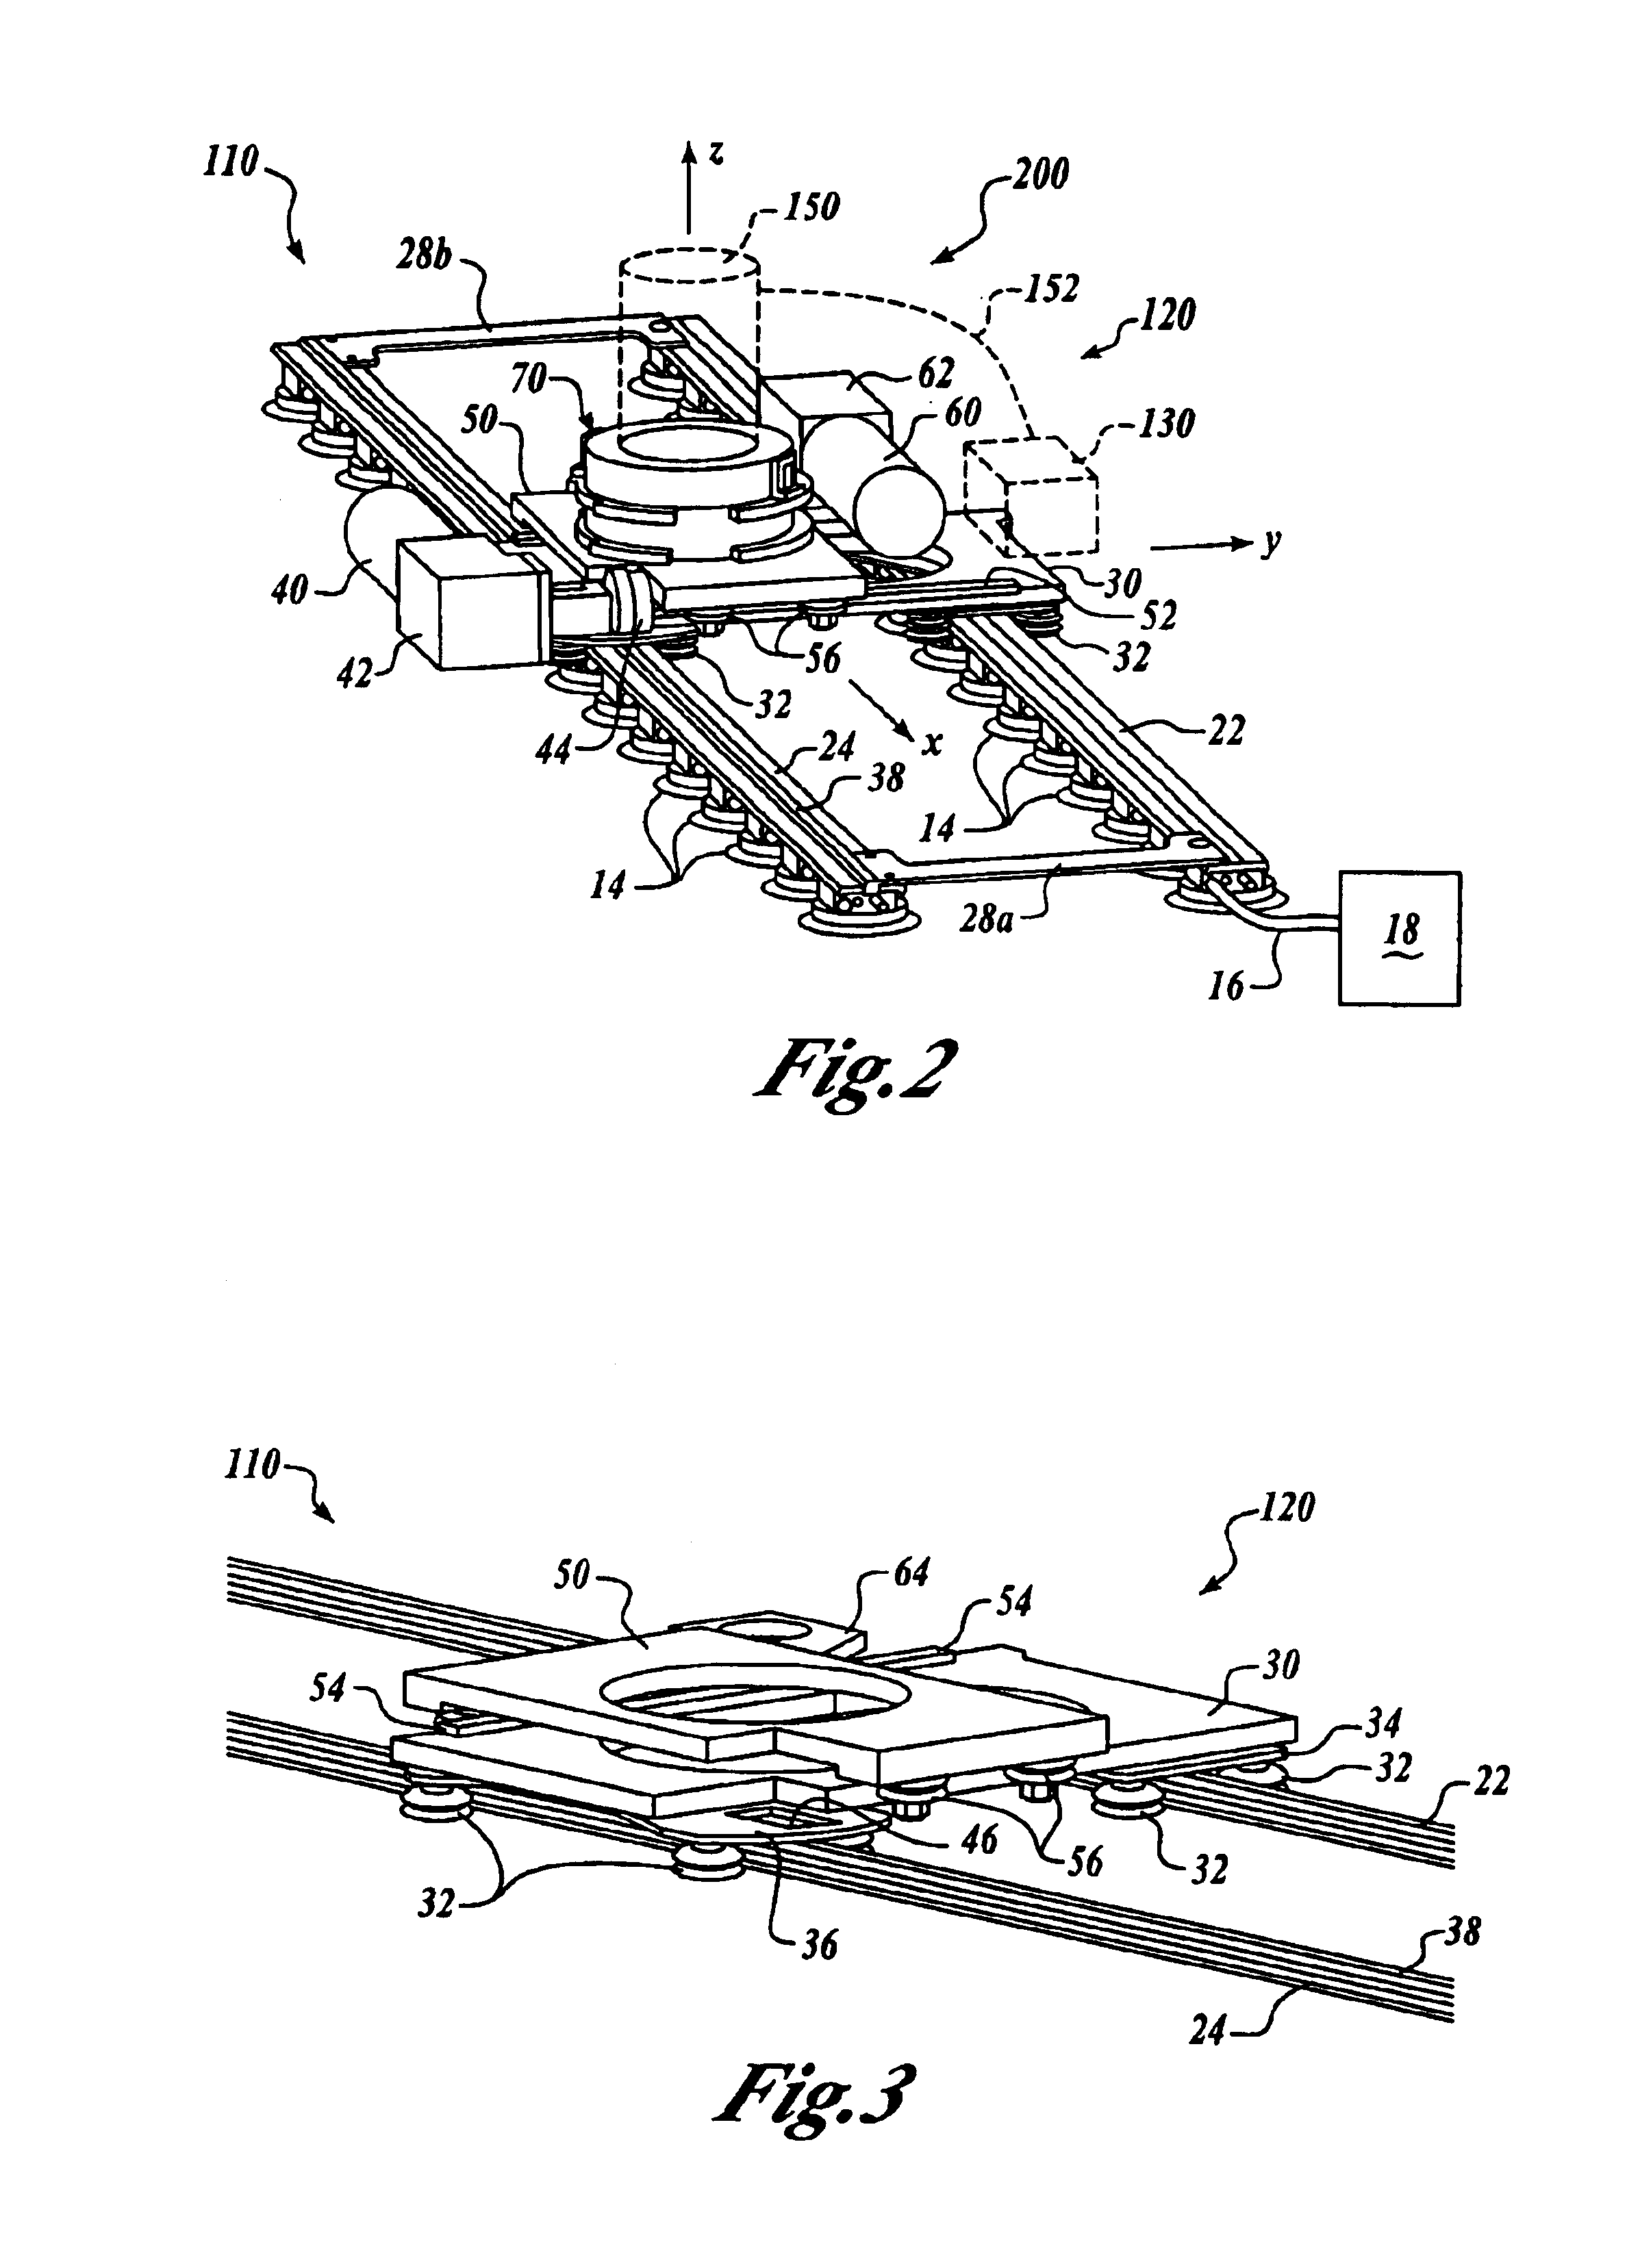 Apparatus for manufacturing operations using non-contact position sensing